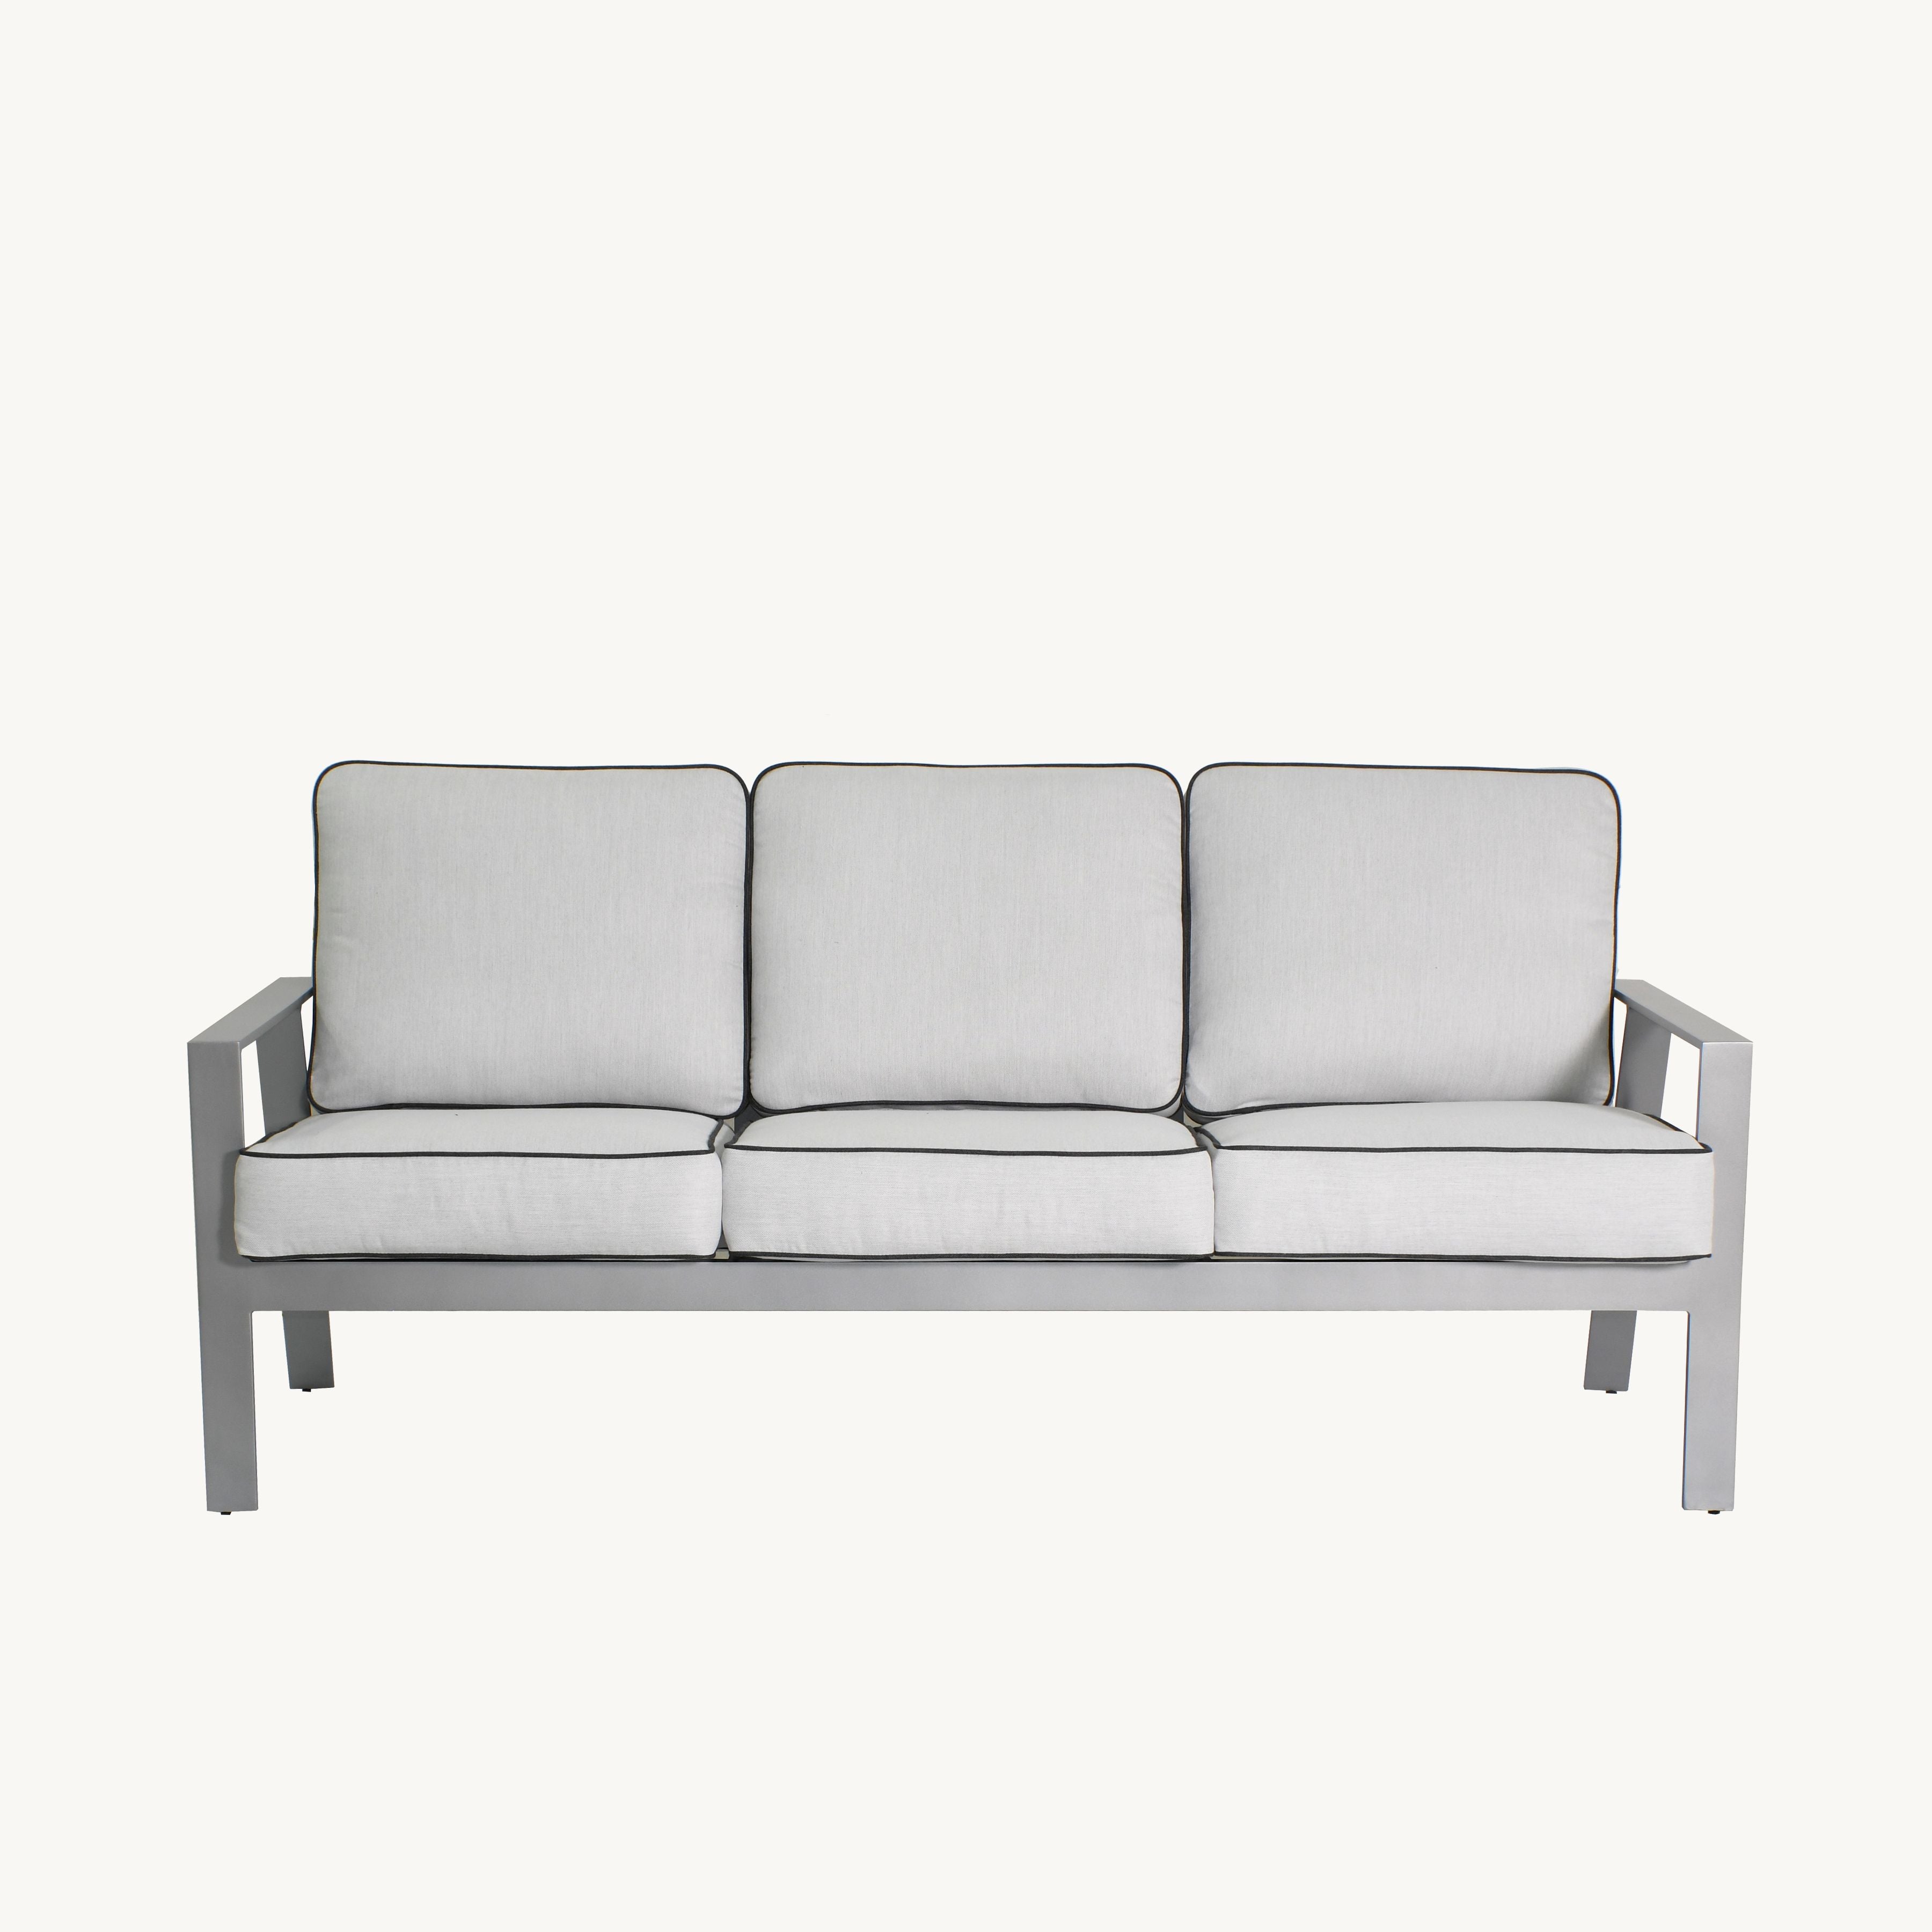 Trento Cushioned Sofa By Castelle